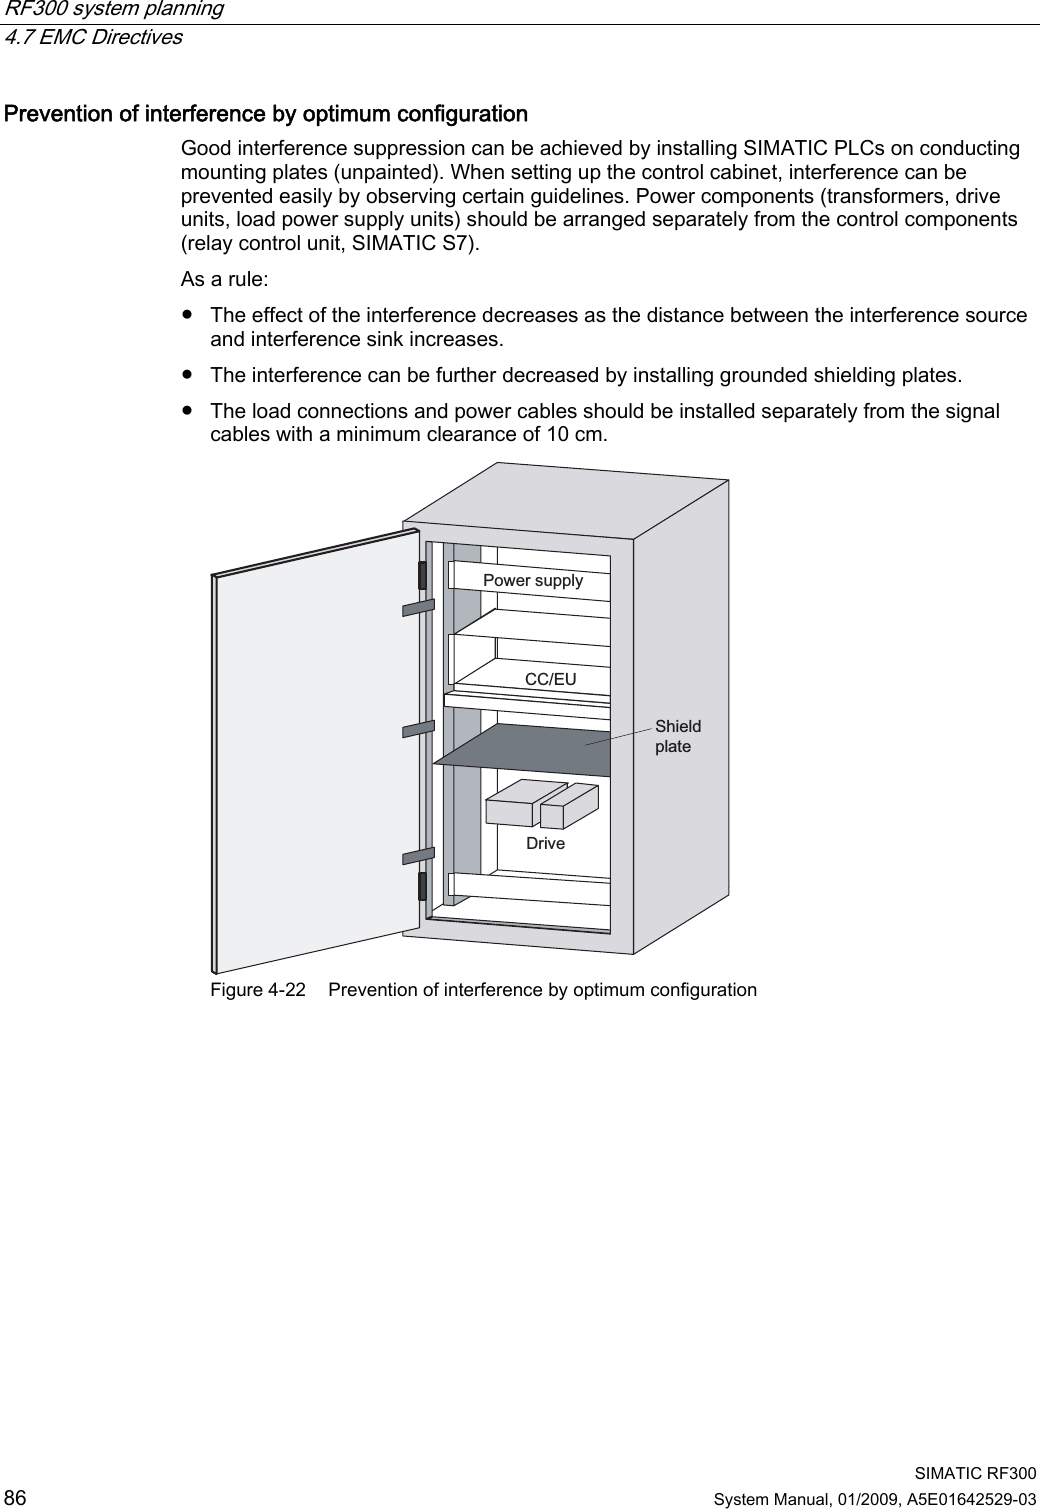 RF300 system planning   4.7 EMC Directives  SIMATIC RF300 86 System Manual, 01/2009, A5E01642529-03 Prevention of interference by optimum configuration Good interference suppression can be achieved by installing SIMATIC PLCs on conducting mounting plates (unpainted). When setting up the control cabinet, interference can be prevented easily by observing certain guidelines. Power components (transformers, drive units, load power supply units) should be arranged separately from the control components (relay control unit, SIMATIC S7). As a rule: ● The effect of the interference decreases as the distance between the interference source and interference sink increases. ● The interference can be further decreased by installing grounded shielding plates. ● The load connections and power cables should be installed separately from the signal cables with a minimum clearance of 10 cm. 3RZHUVXSSO\&amp;&amp;(8&apos;ULYH6KLHOGSODWH Figure 4-22  Prevention of interference by optimum configuration 